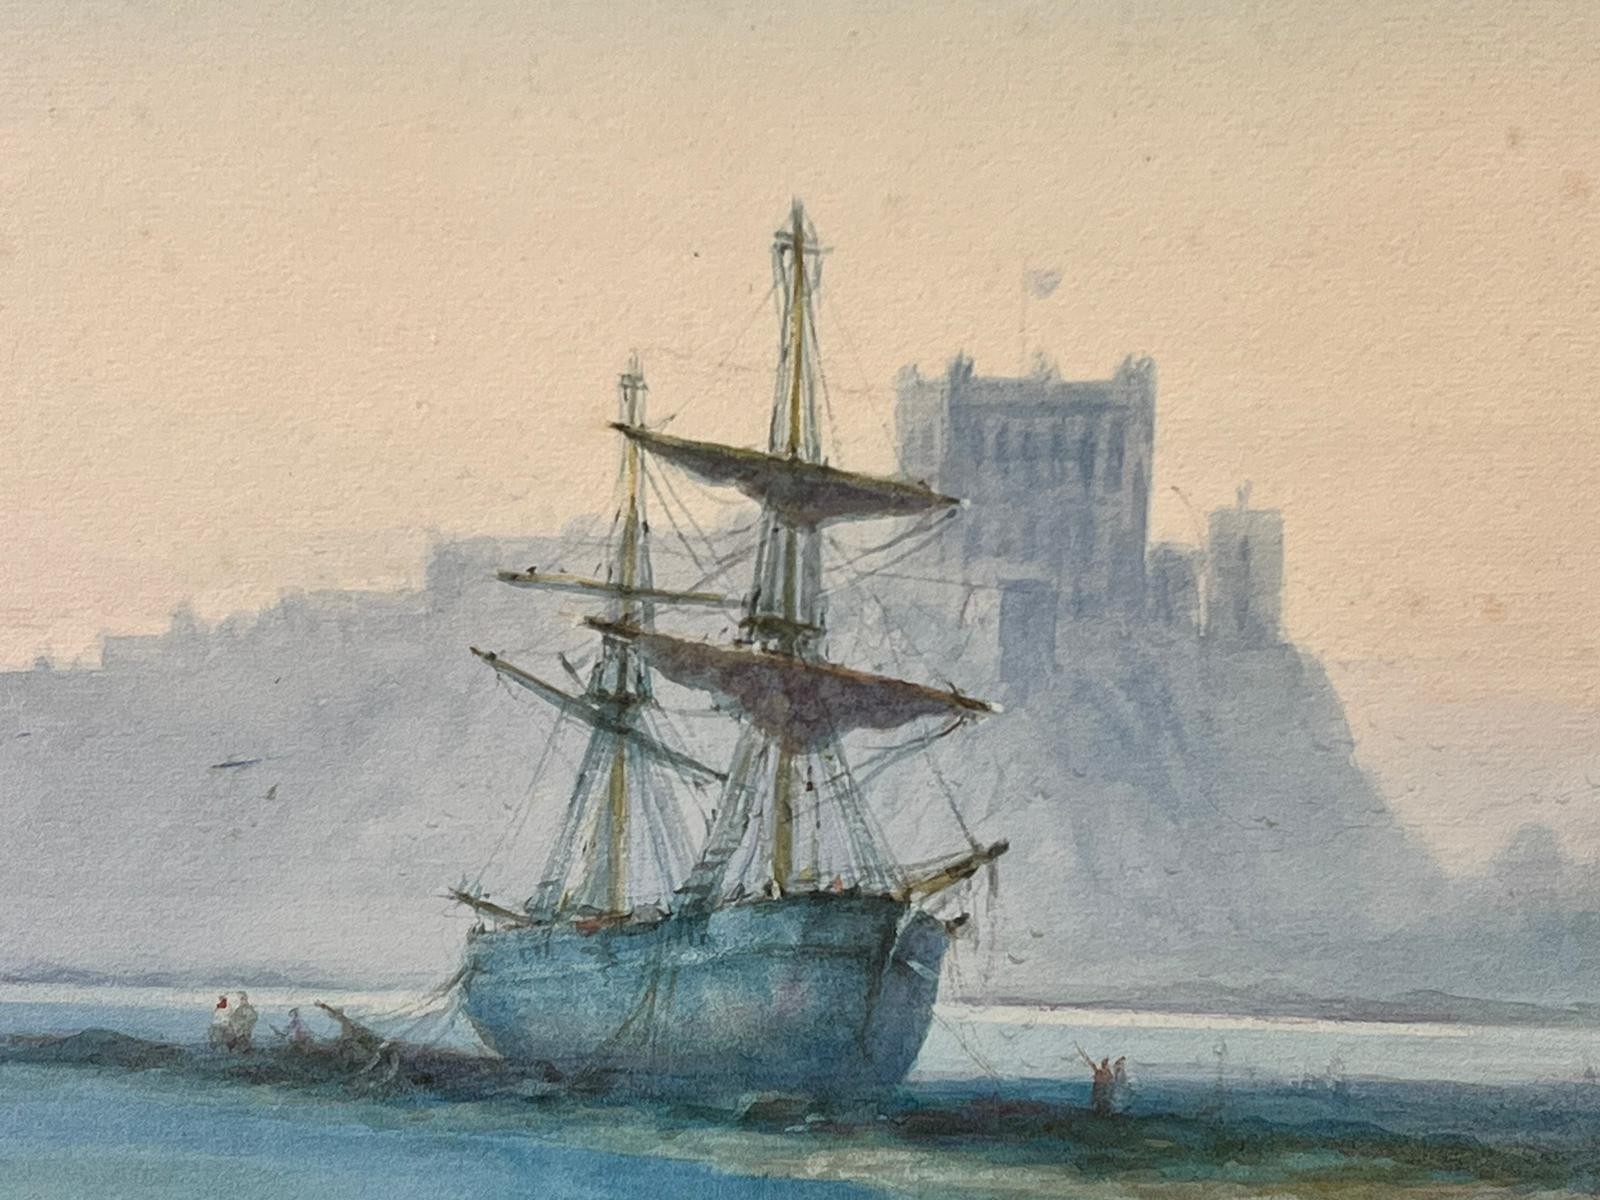 Antique British Marine Painting Classic Tallship Beached on Shore with Castle  - Victorian Art by Antique English Marine